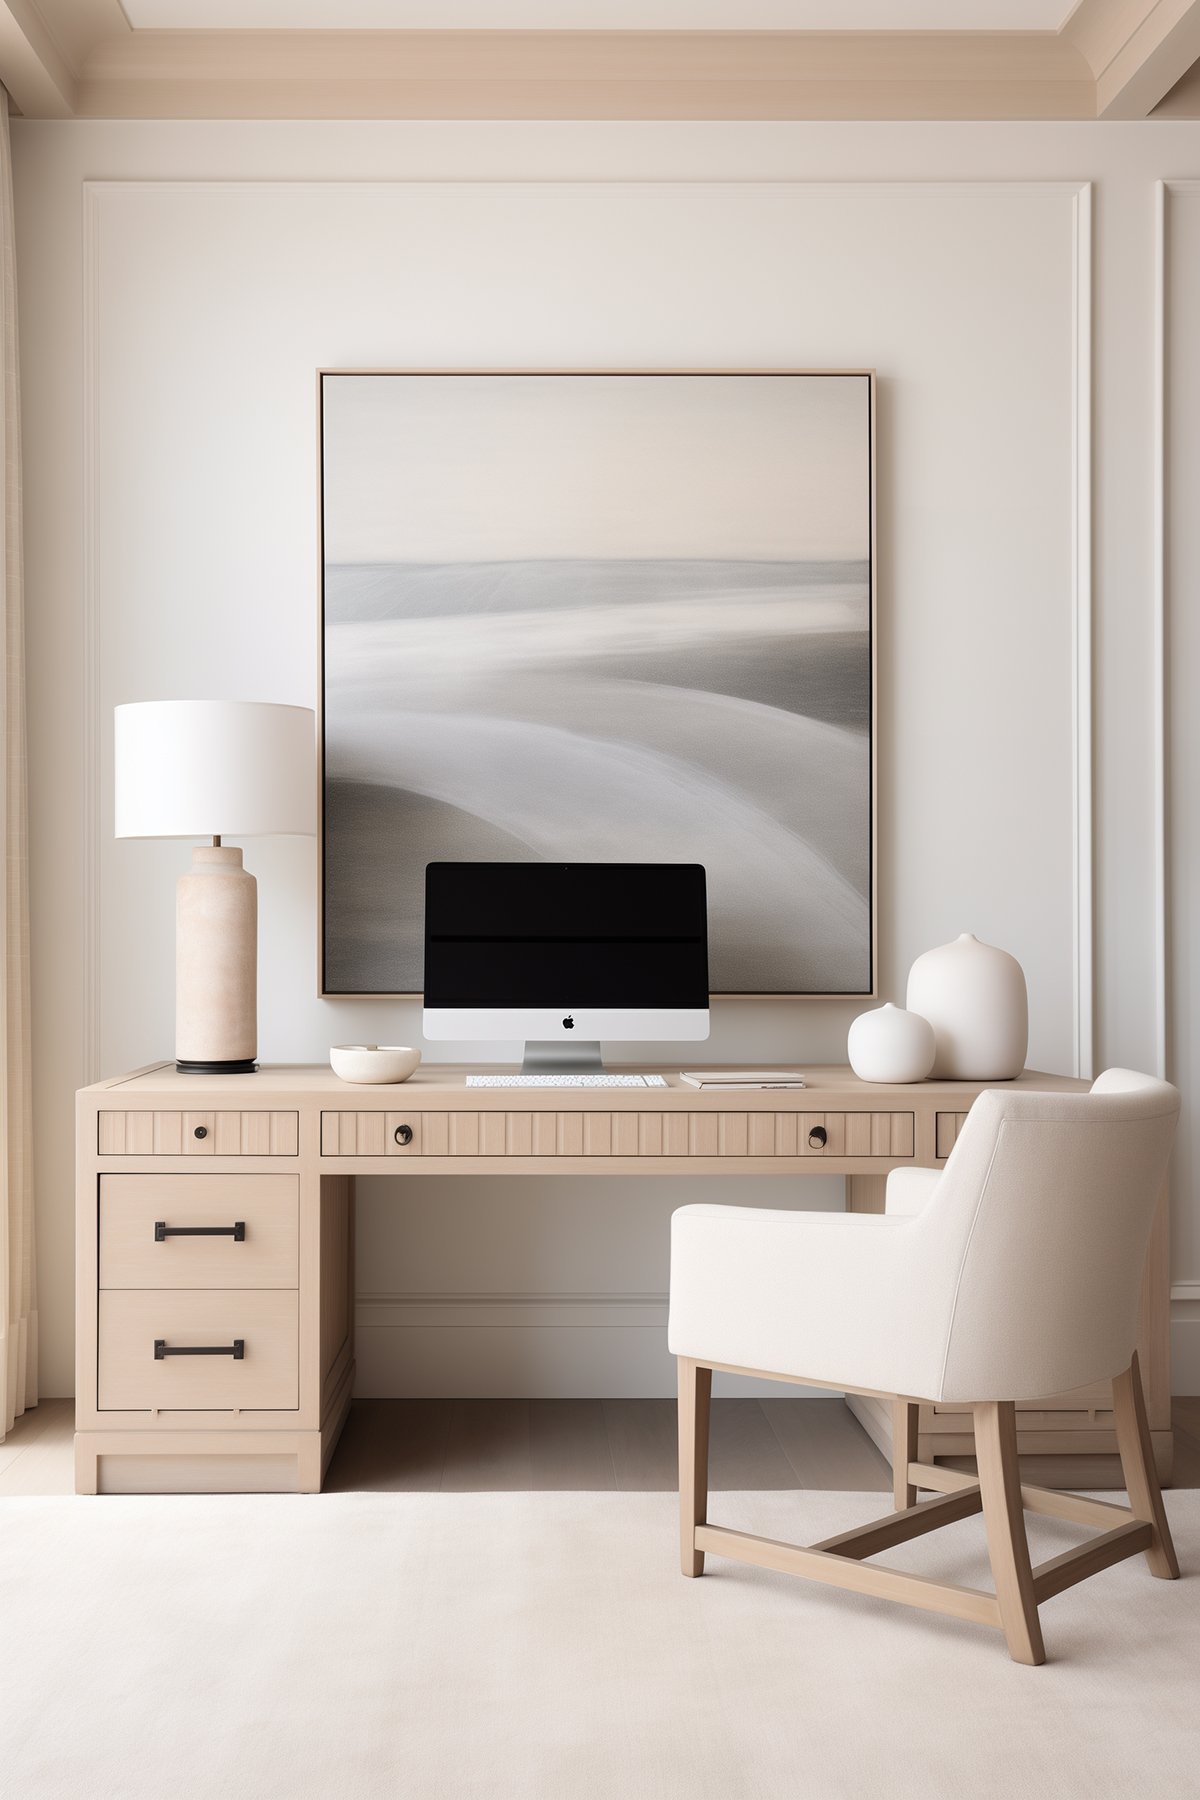 Monochromatic office with beige desk, abstract art, and modern decor.